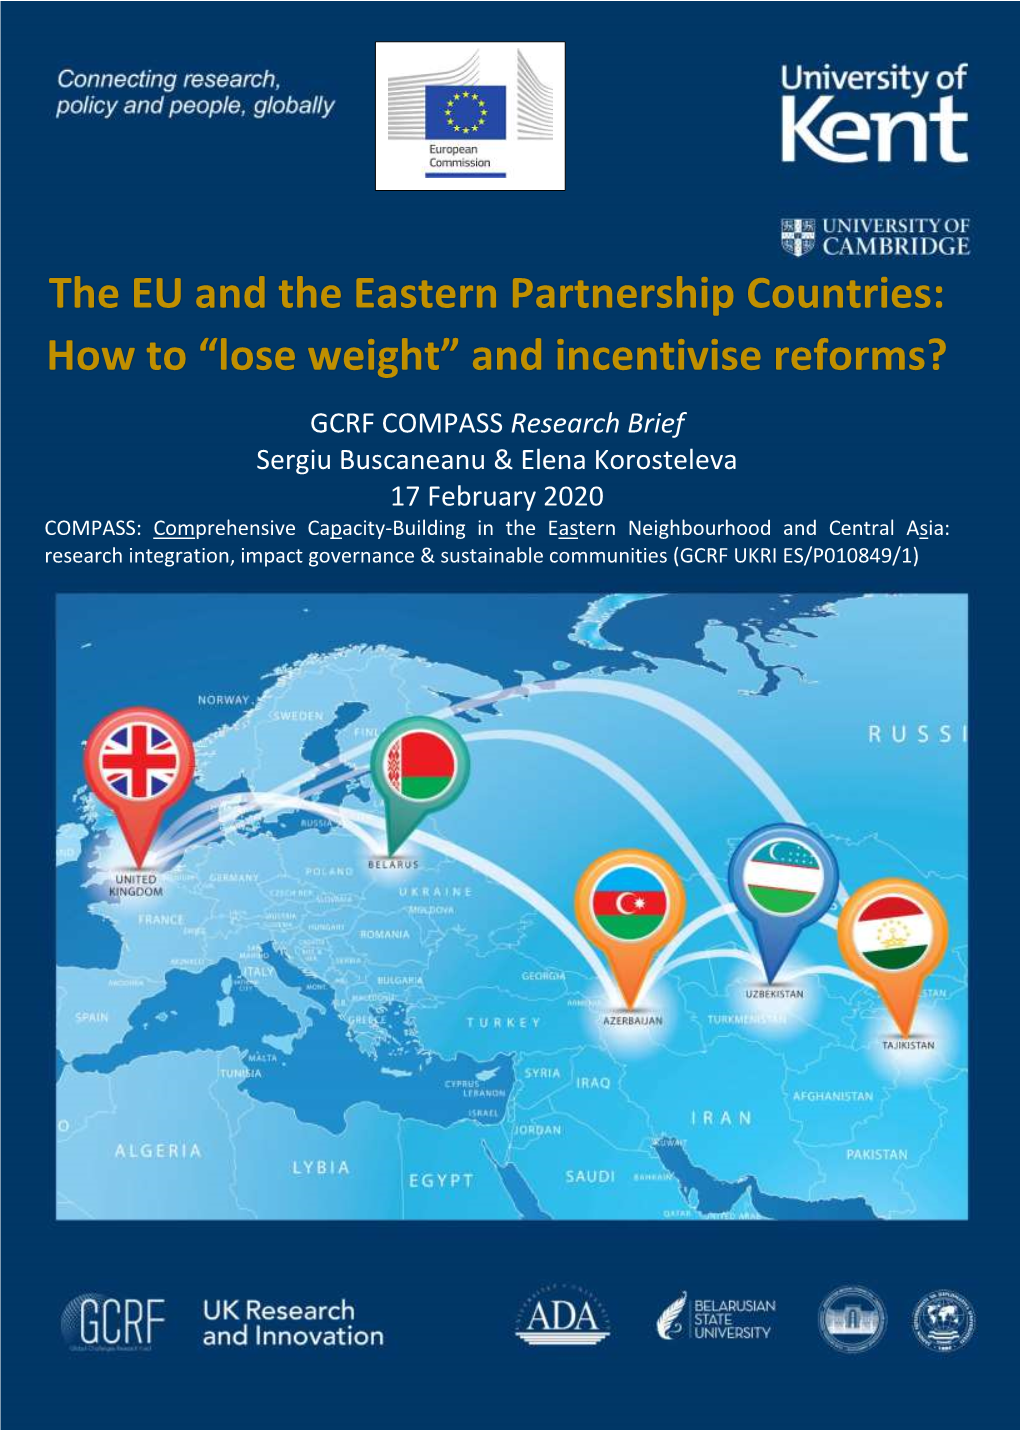 The EU and the Eastern Partnership Countries: How to “Lose Weight” and Incentivise Reforms?